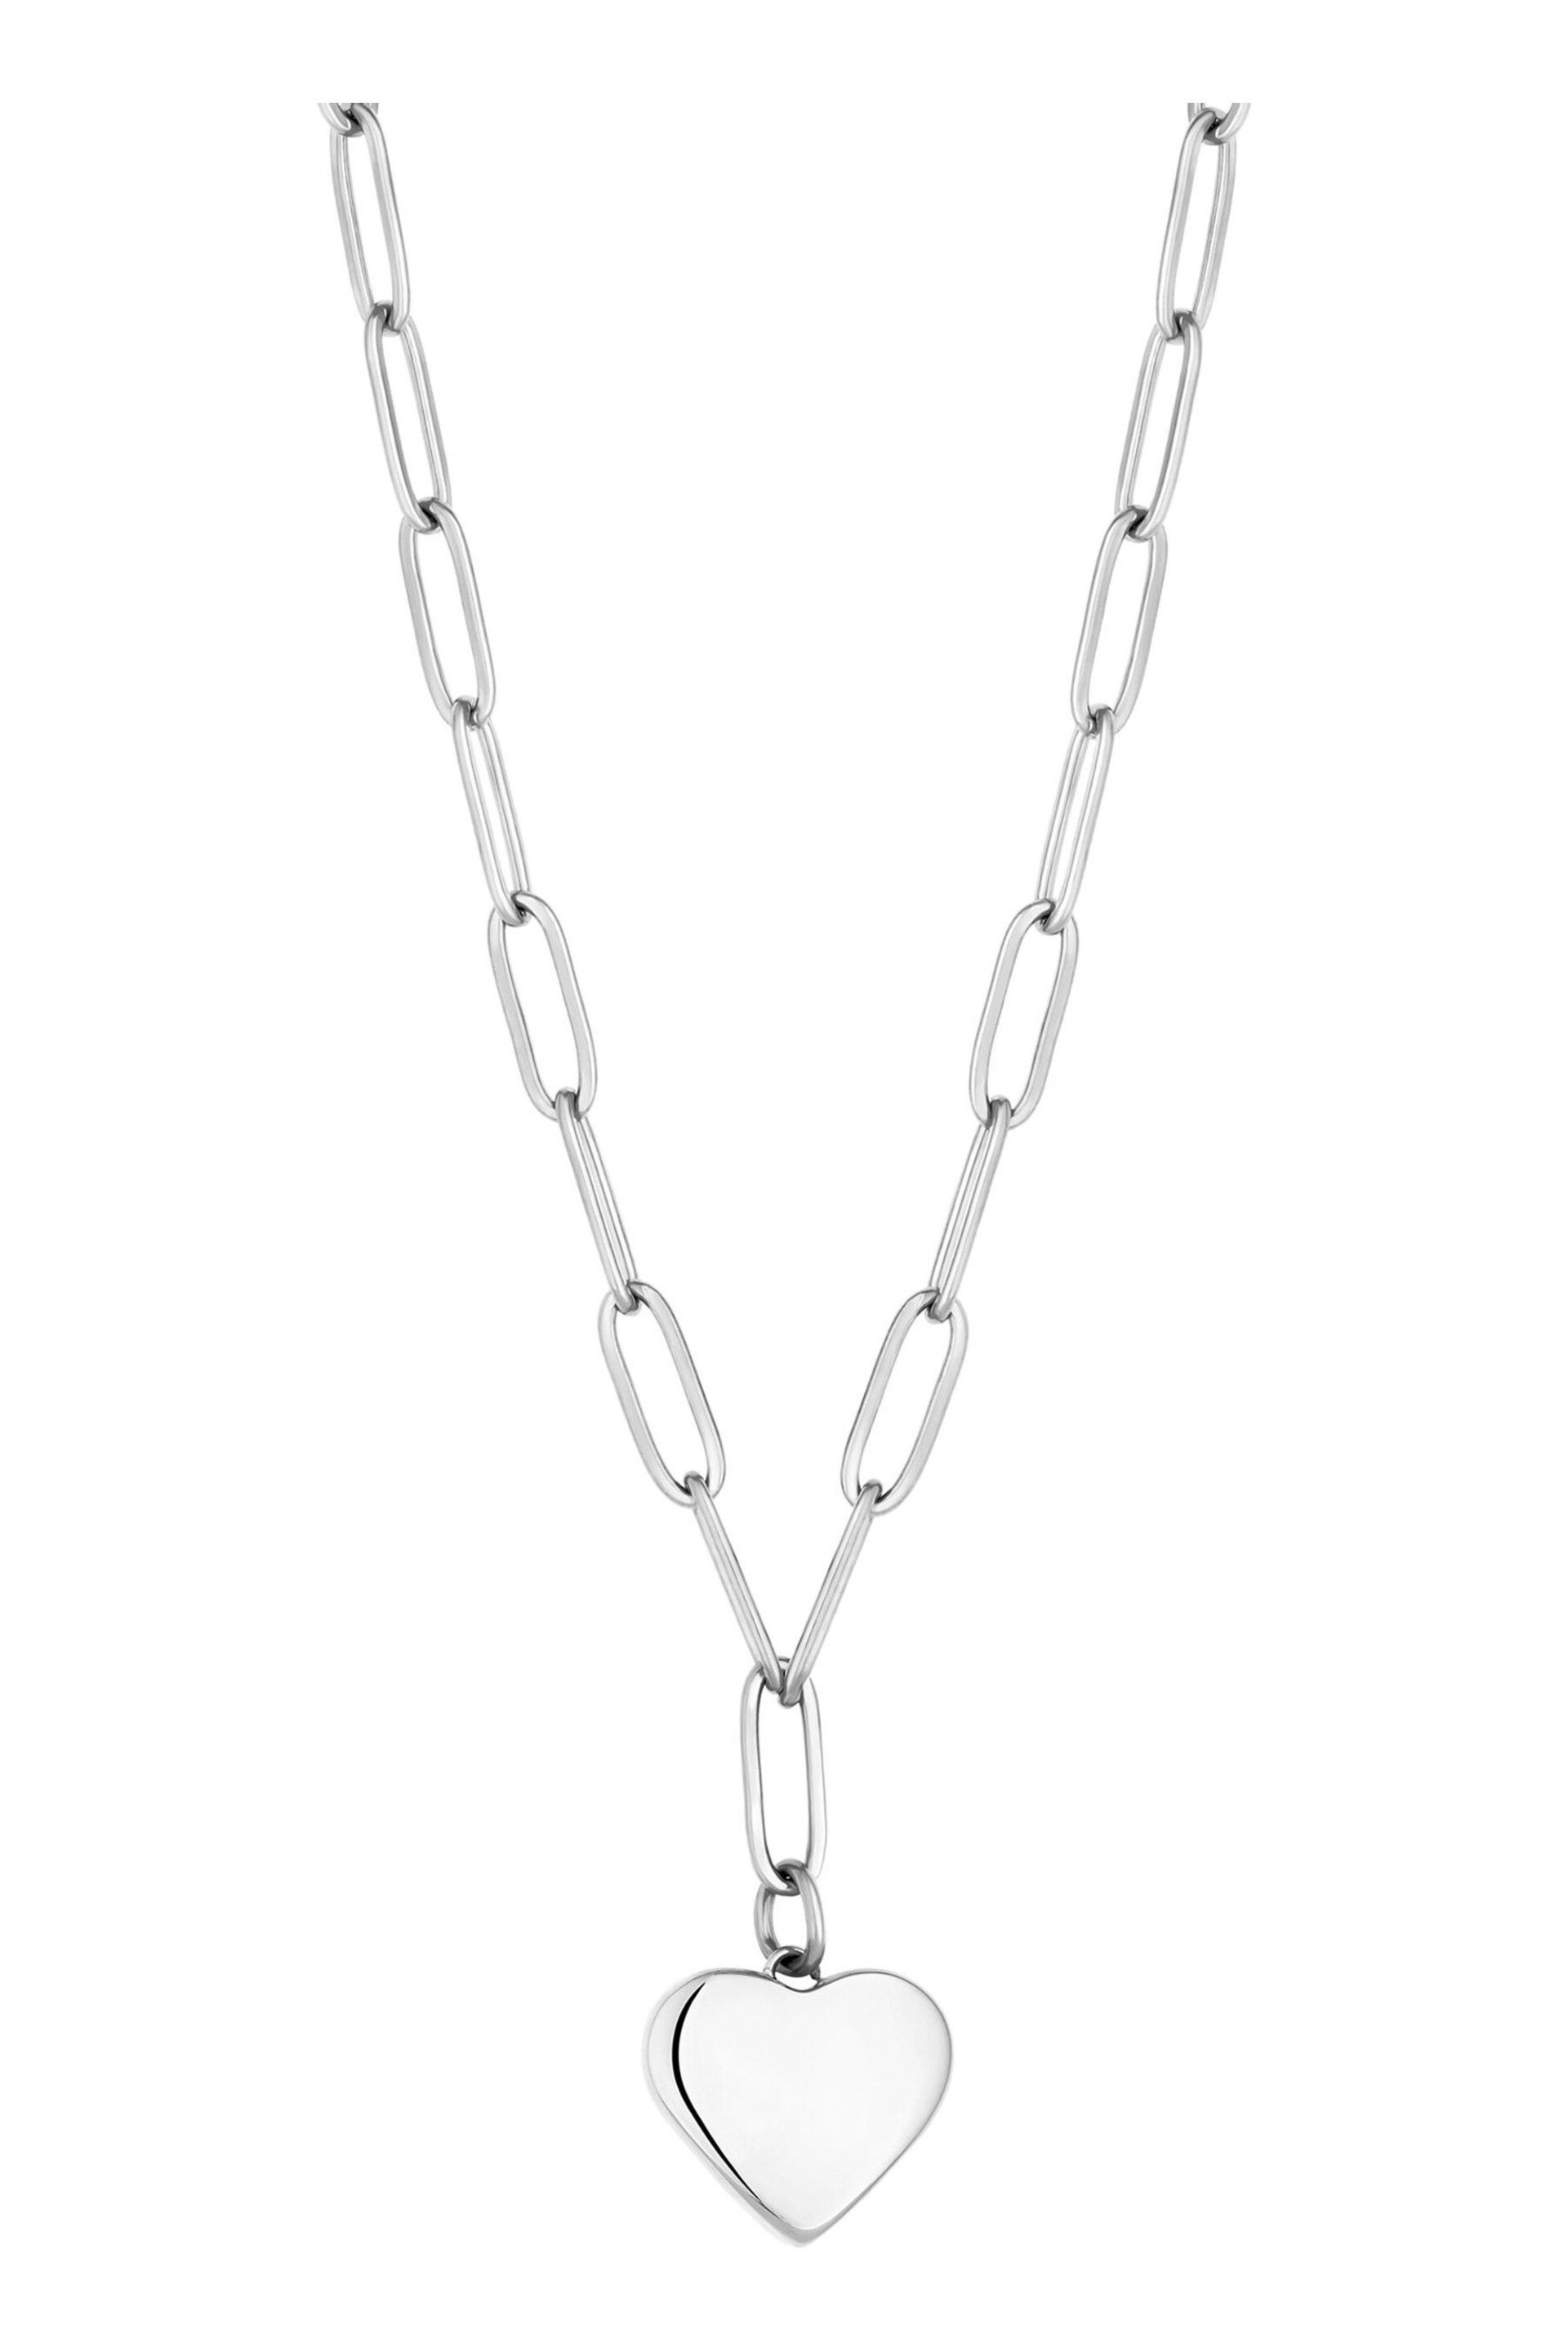 Mood Silver Polished Heart Chain Necklace - Image 1 of 3